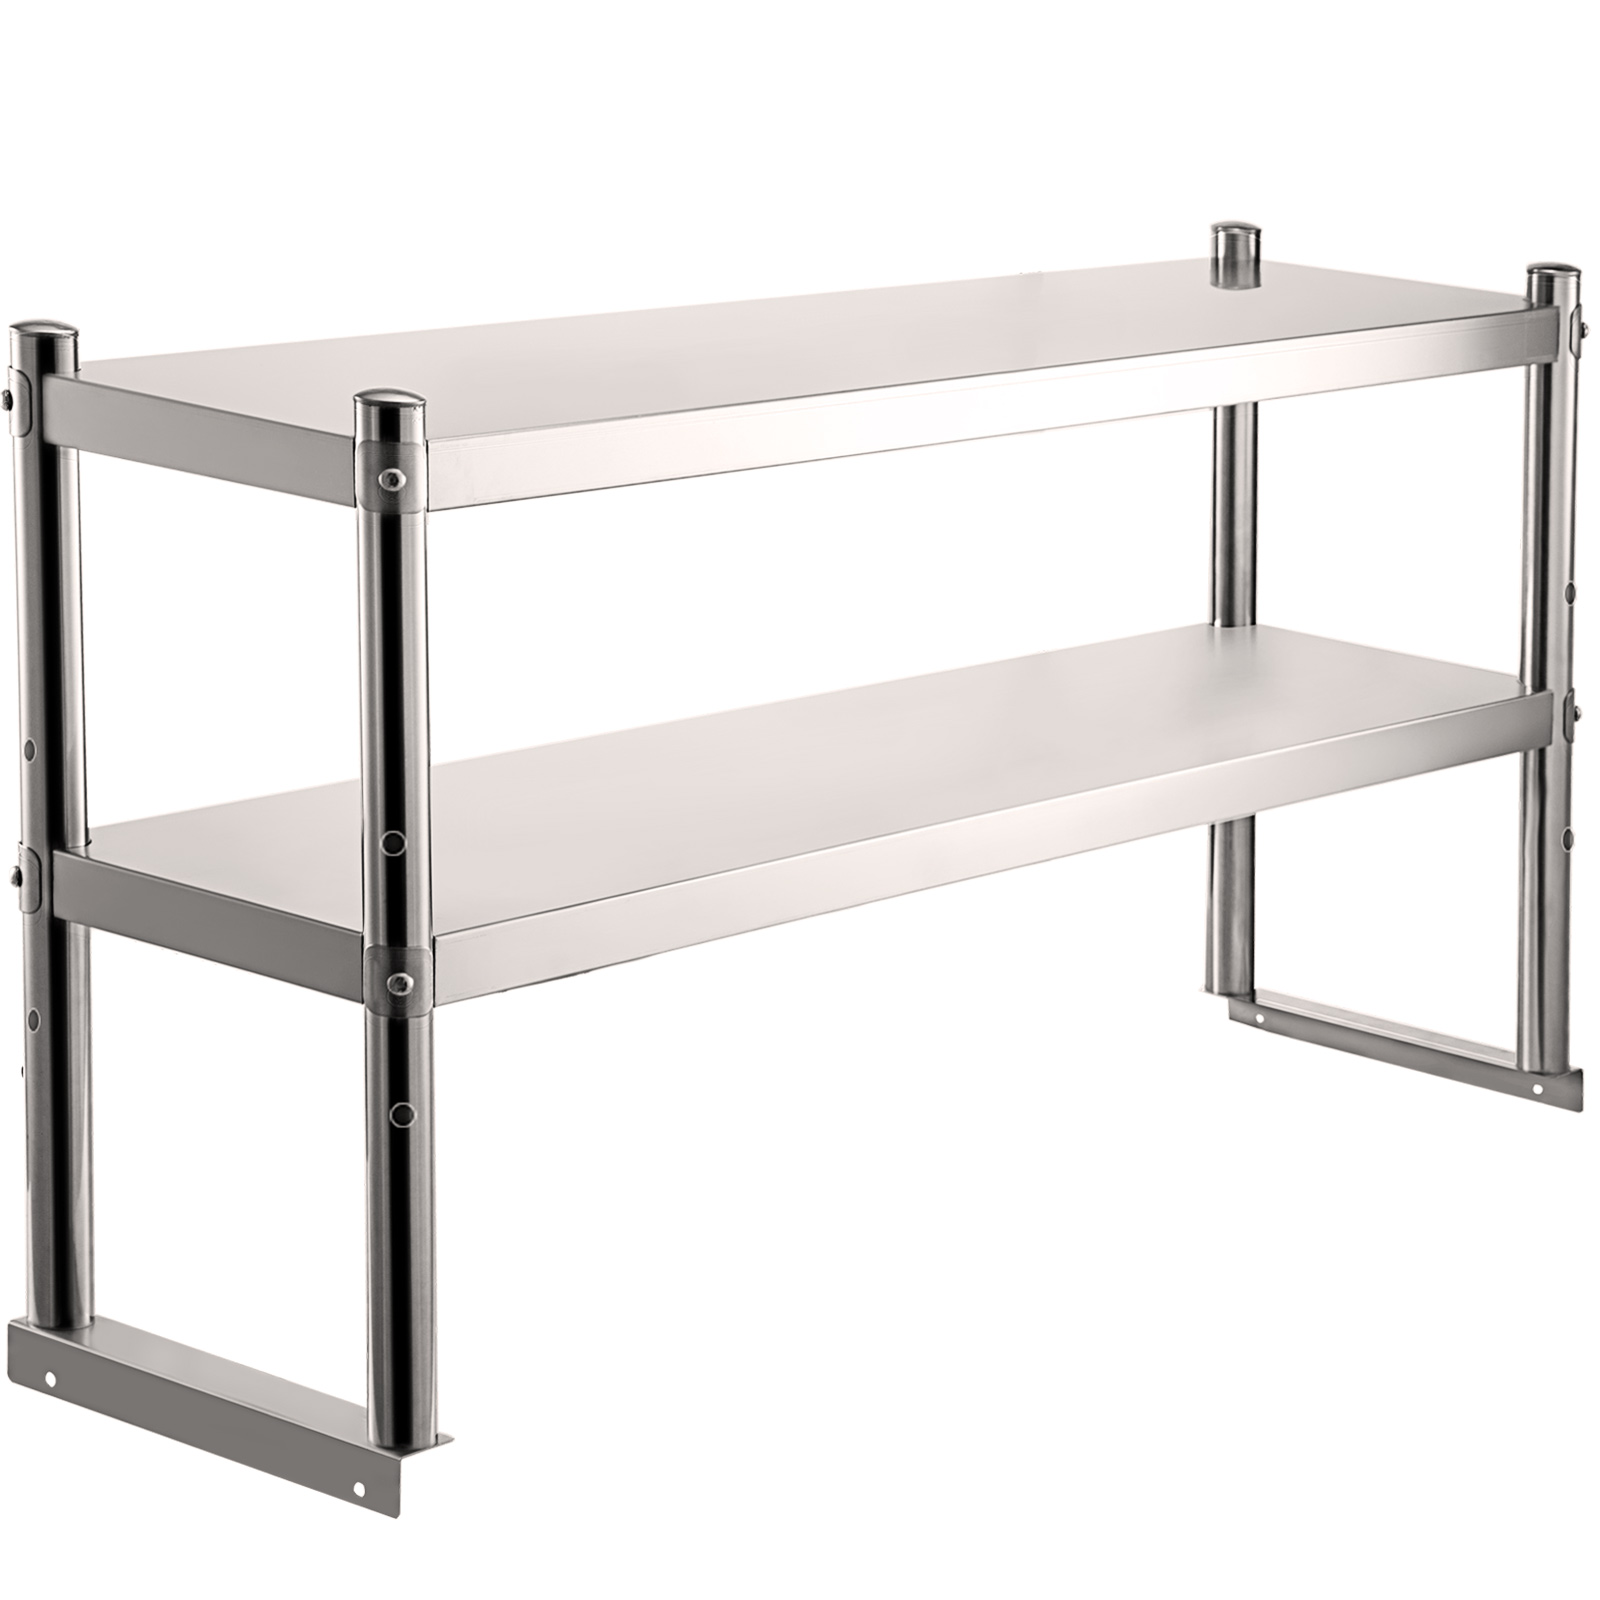 ANY SIZE Stainless Steel Work Prep Table Commercial Overshelf Double Stainless Steel Table With Overshelf